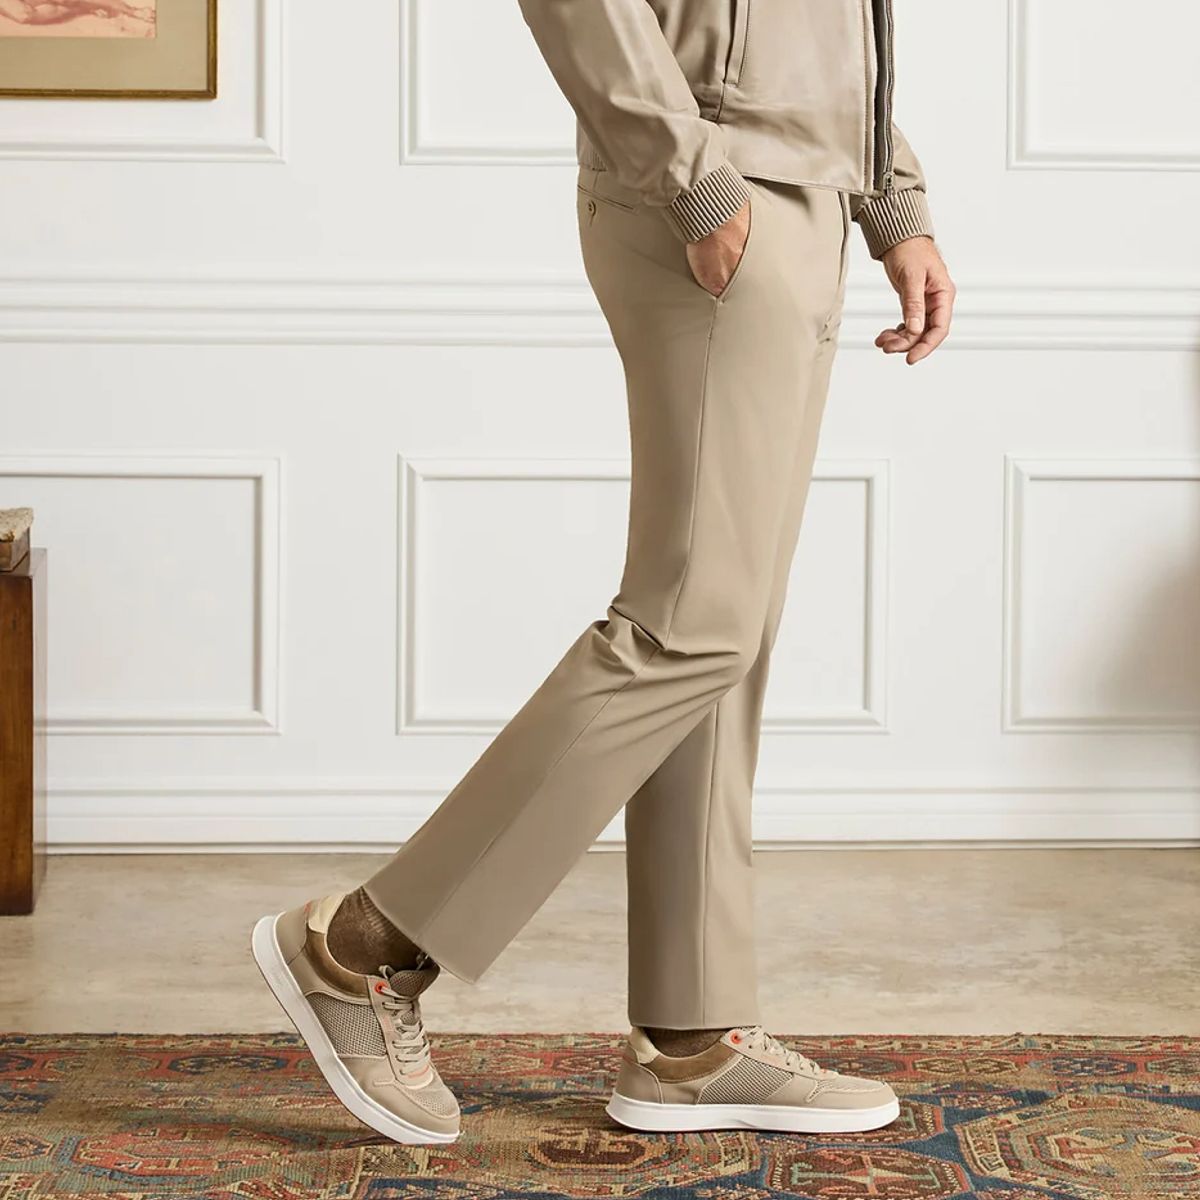 Noah Active Trousers in Tan (Trim Tapered Fit) by Zanella